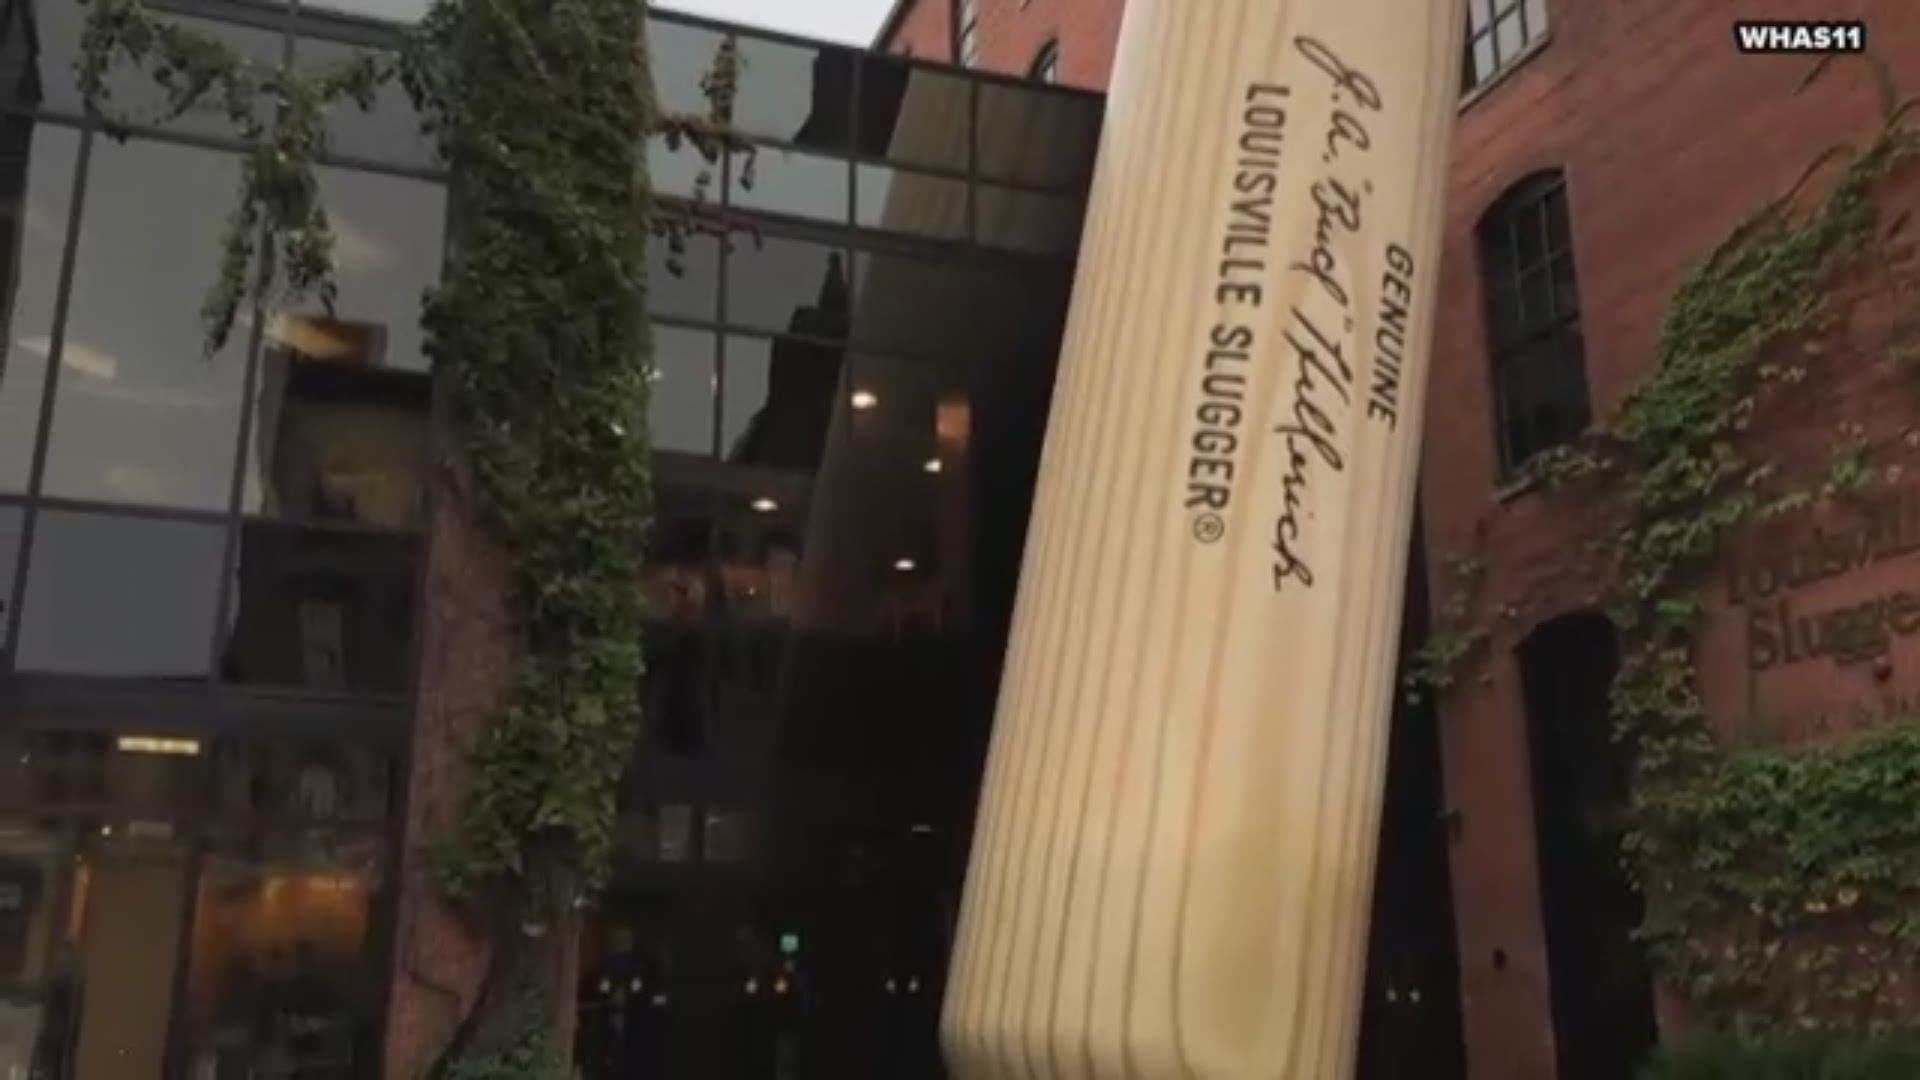 We’re talking about true home run craftsmanship here! Take a look at how the slugger bat is made for the World Series!